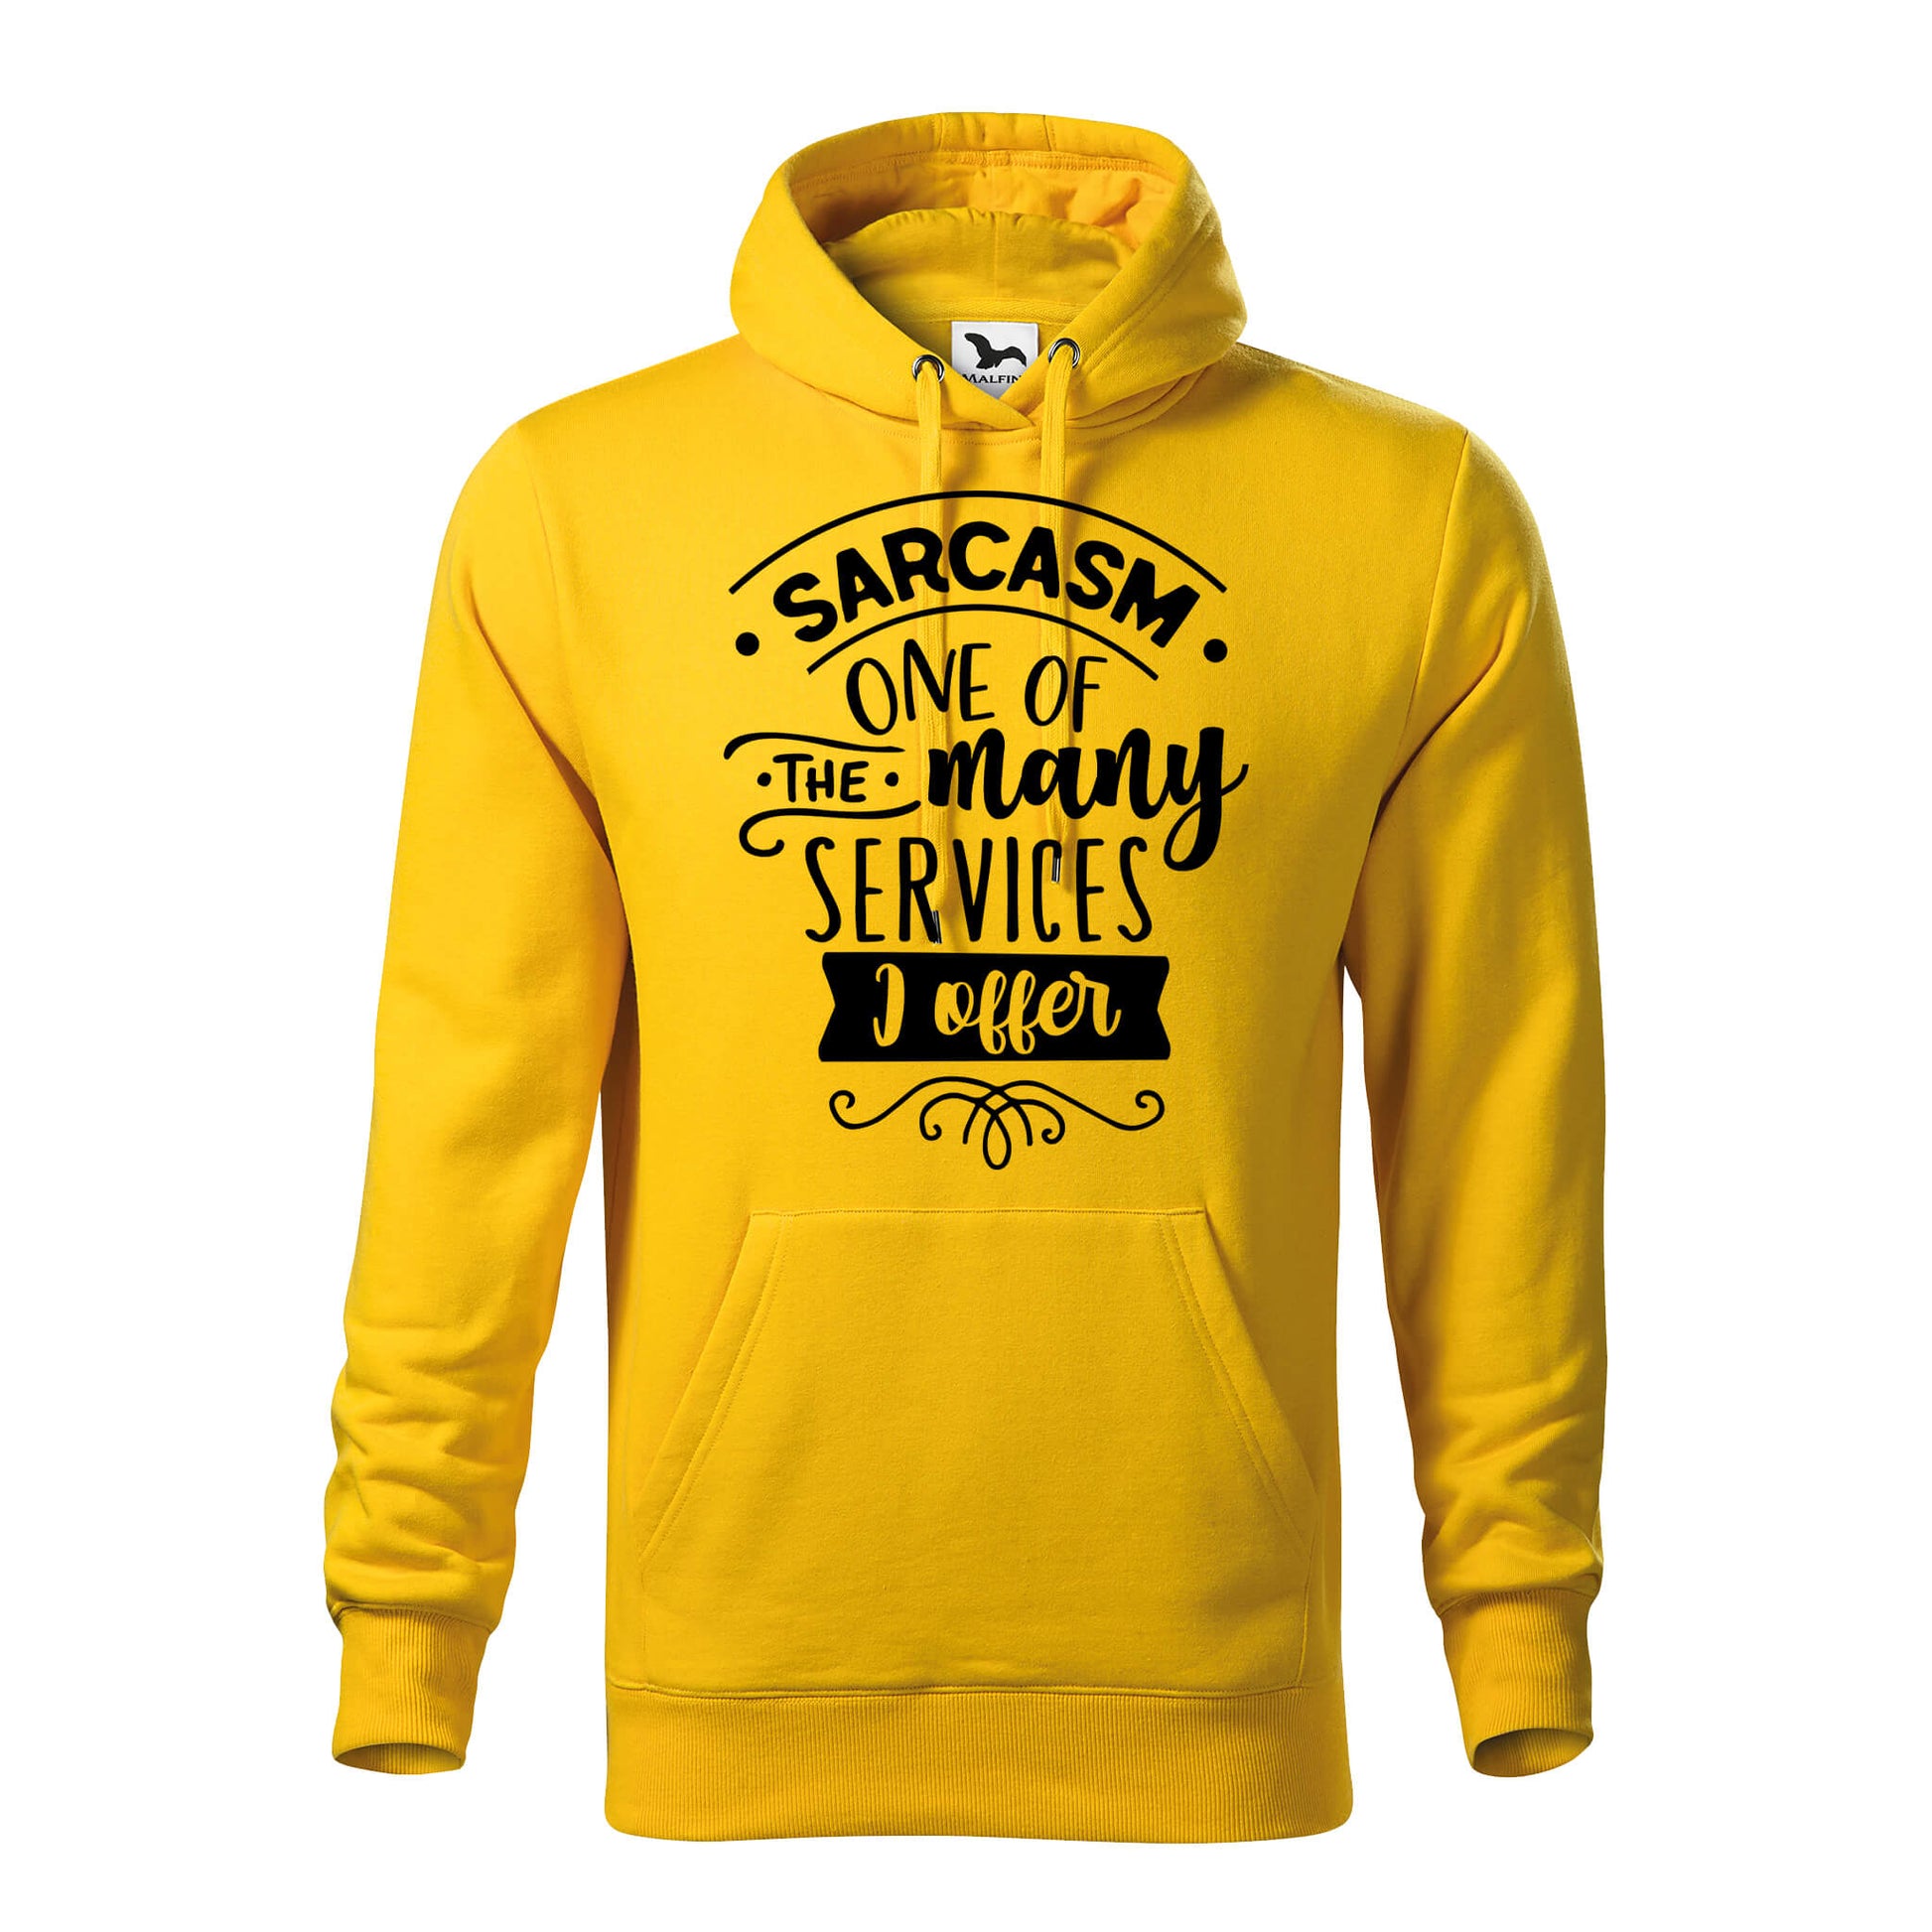 Sarcasm one of the hoodie - rvdesignprint